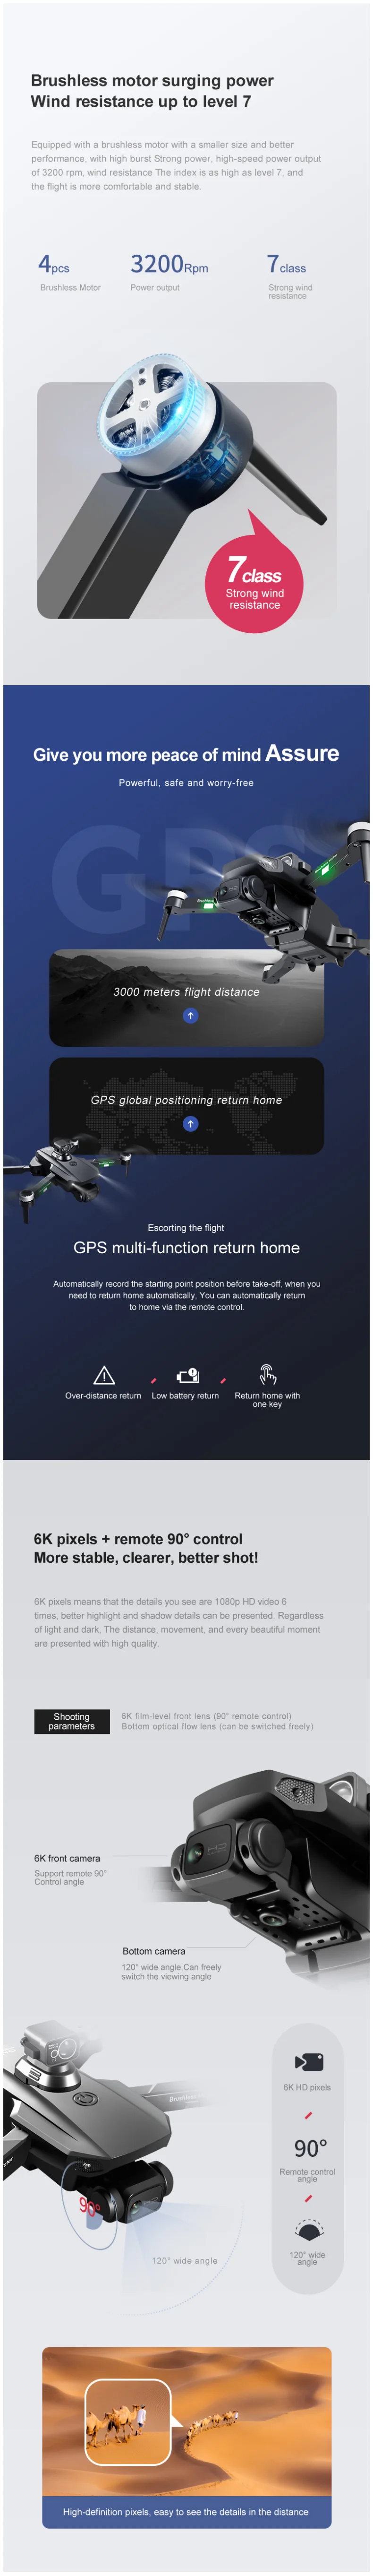 GR101 Drone, the gr101 drone has a one-click return to the departure